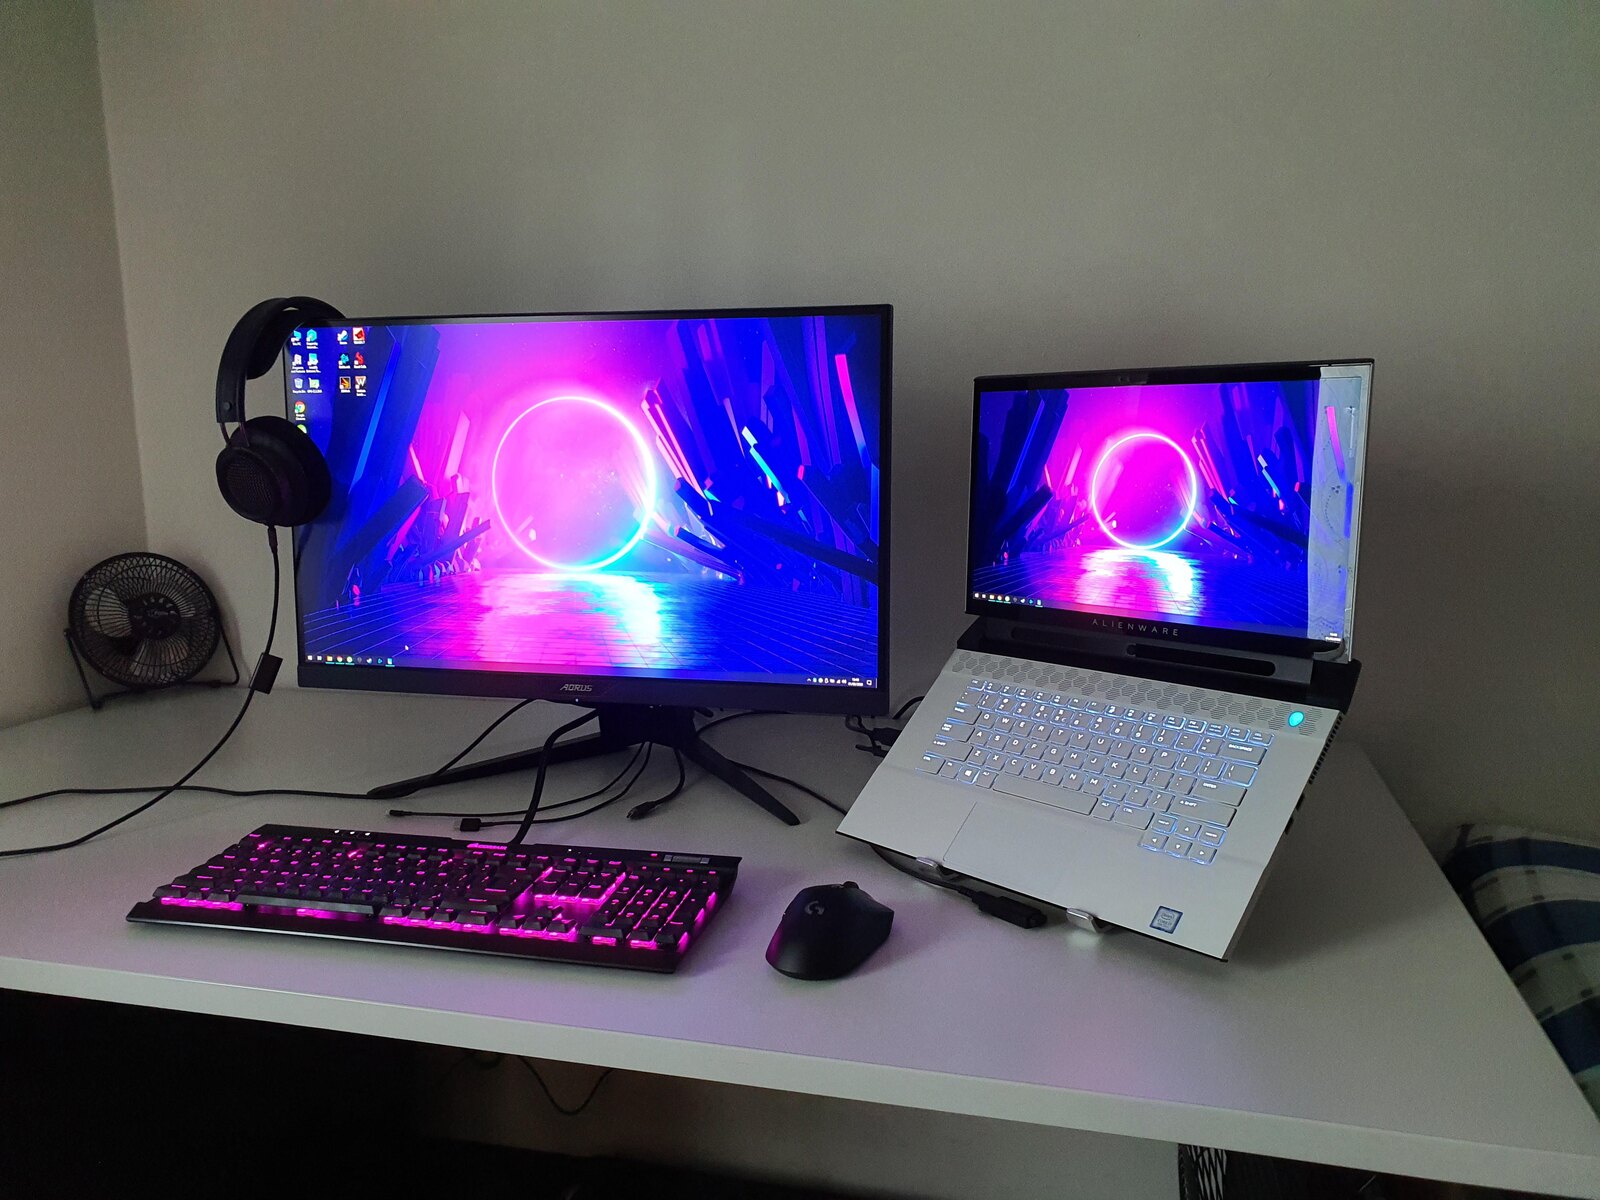 Connect Your Laptop to Multiple Gaming Monitors